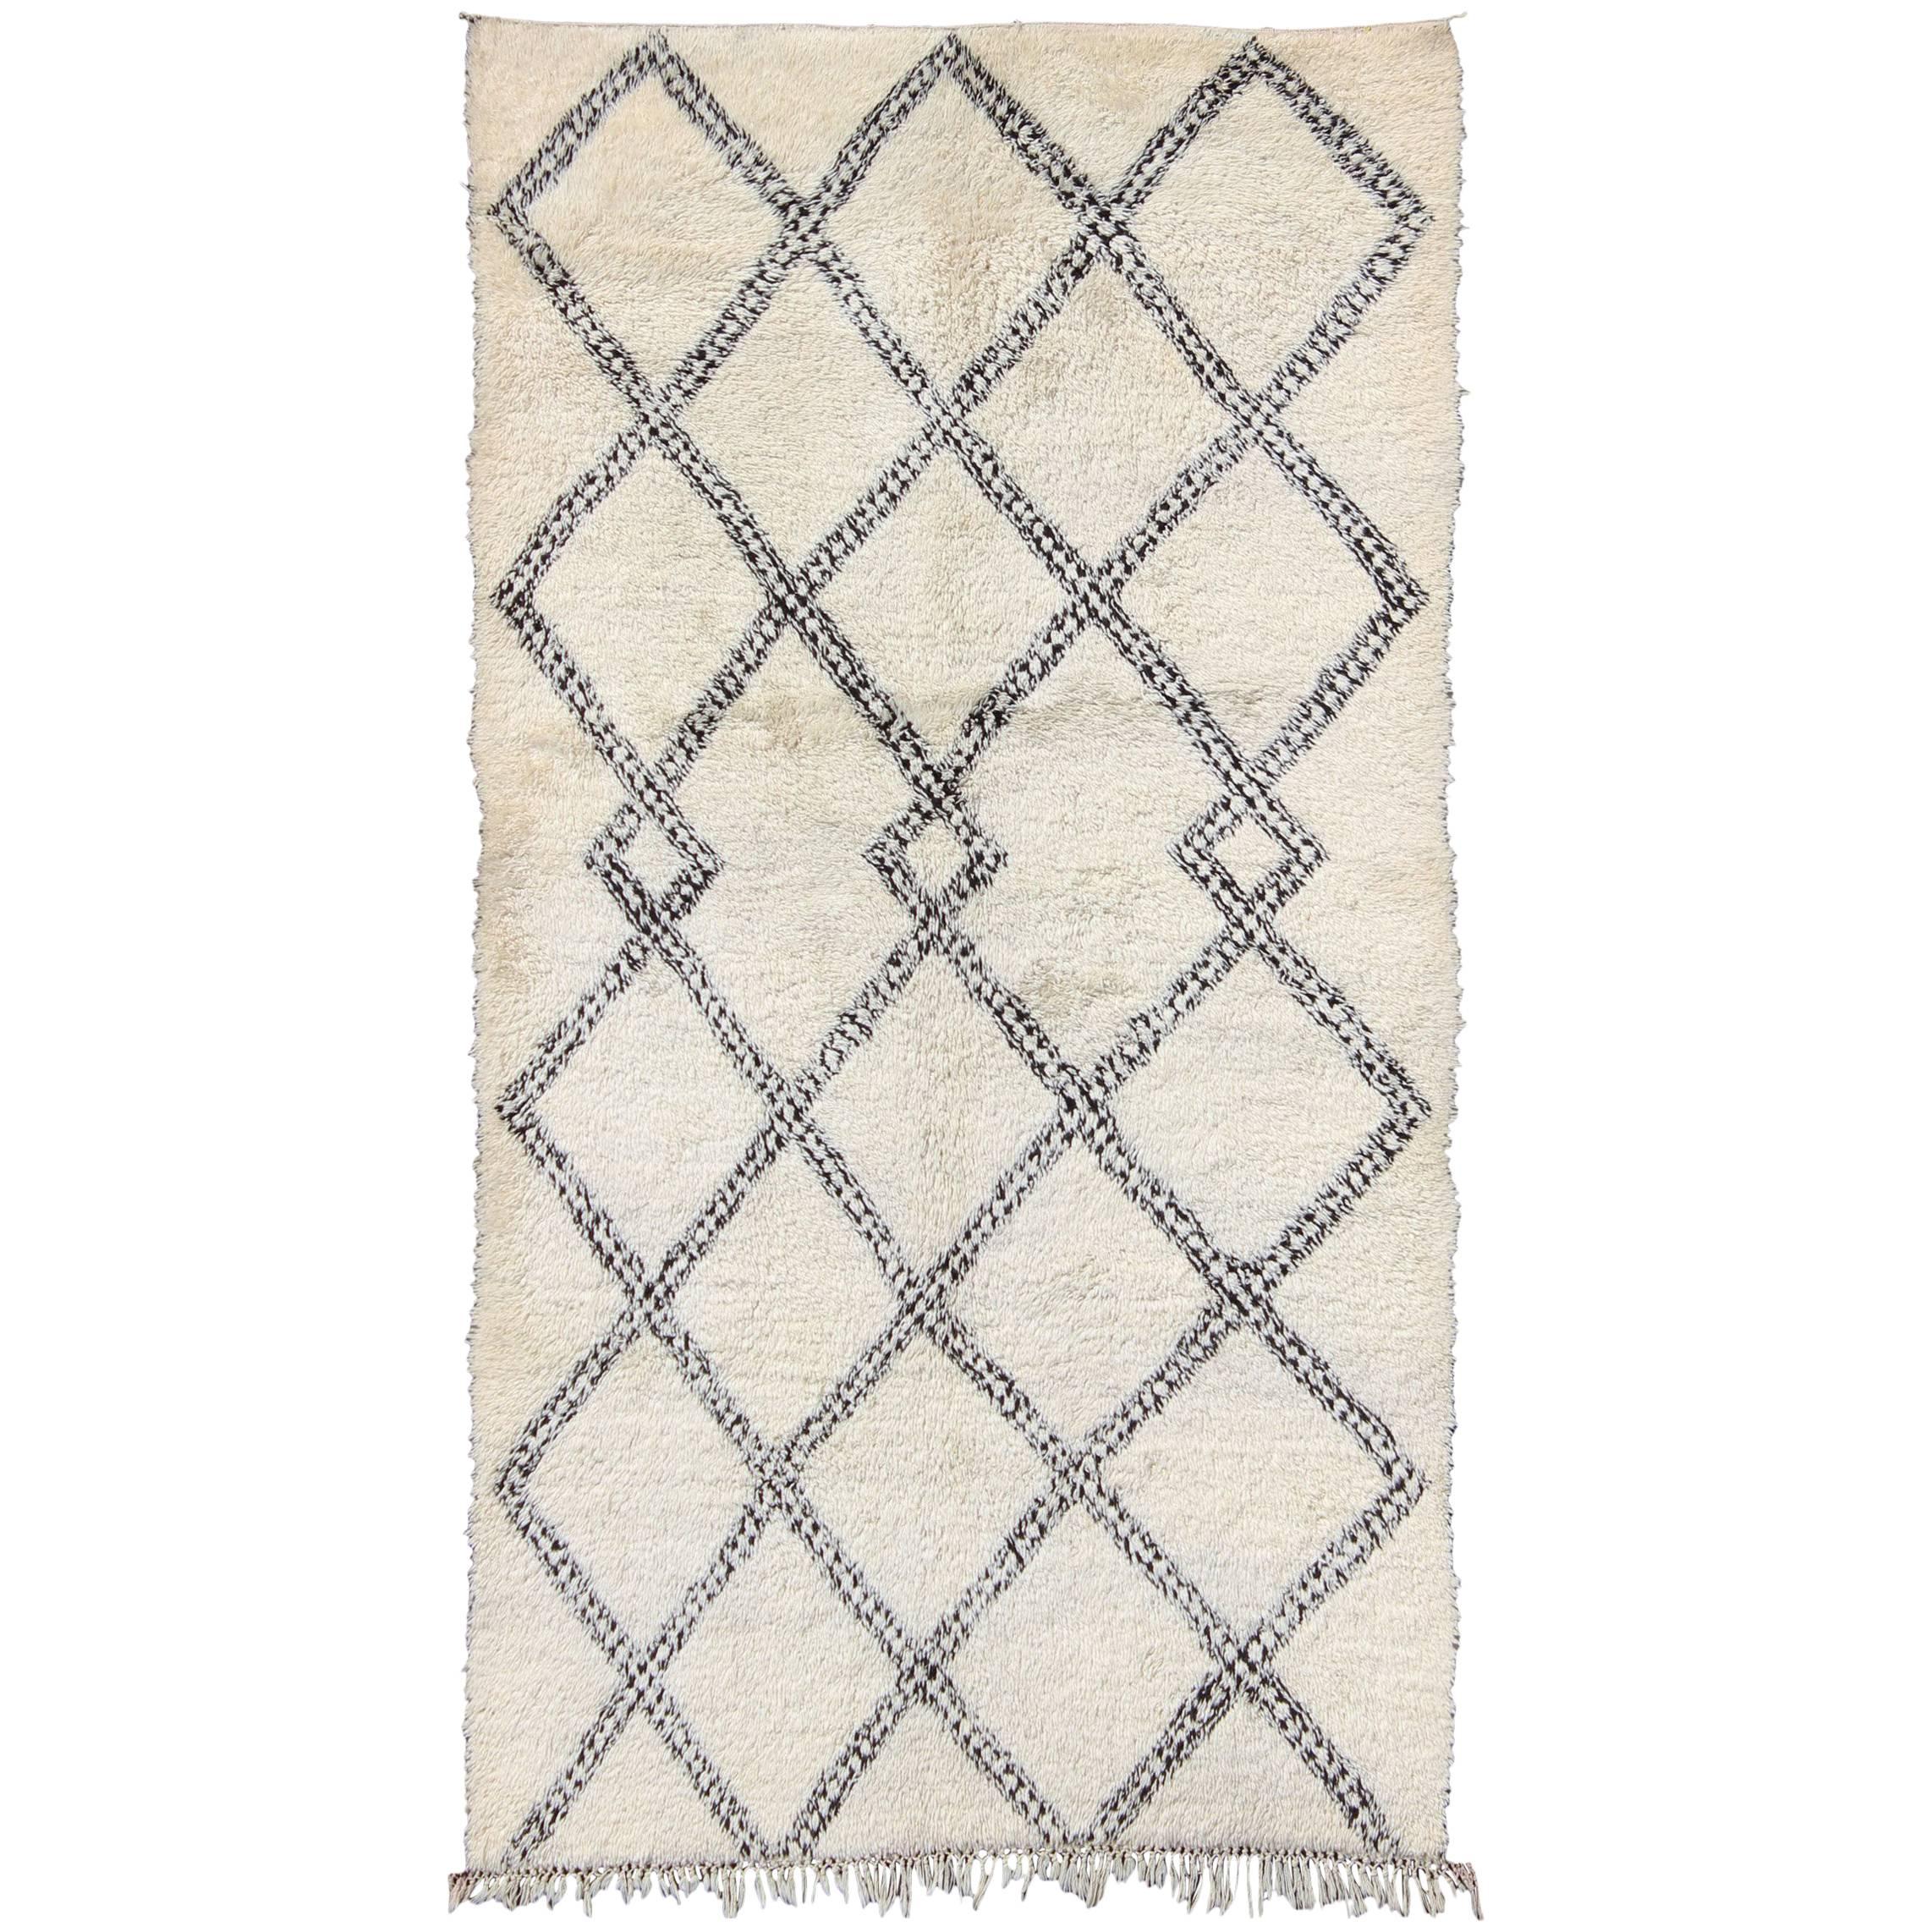 Large White Background Vintage Beni Ourain Moroccan Rug with Charcoal Diamonds